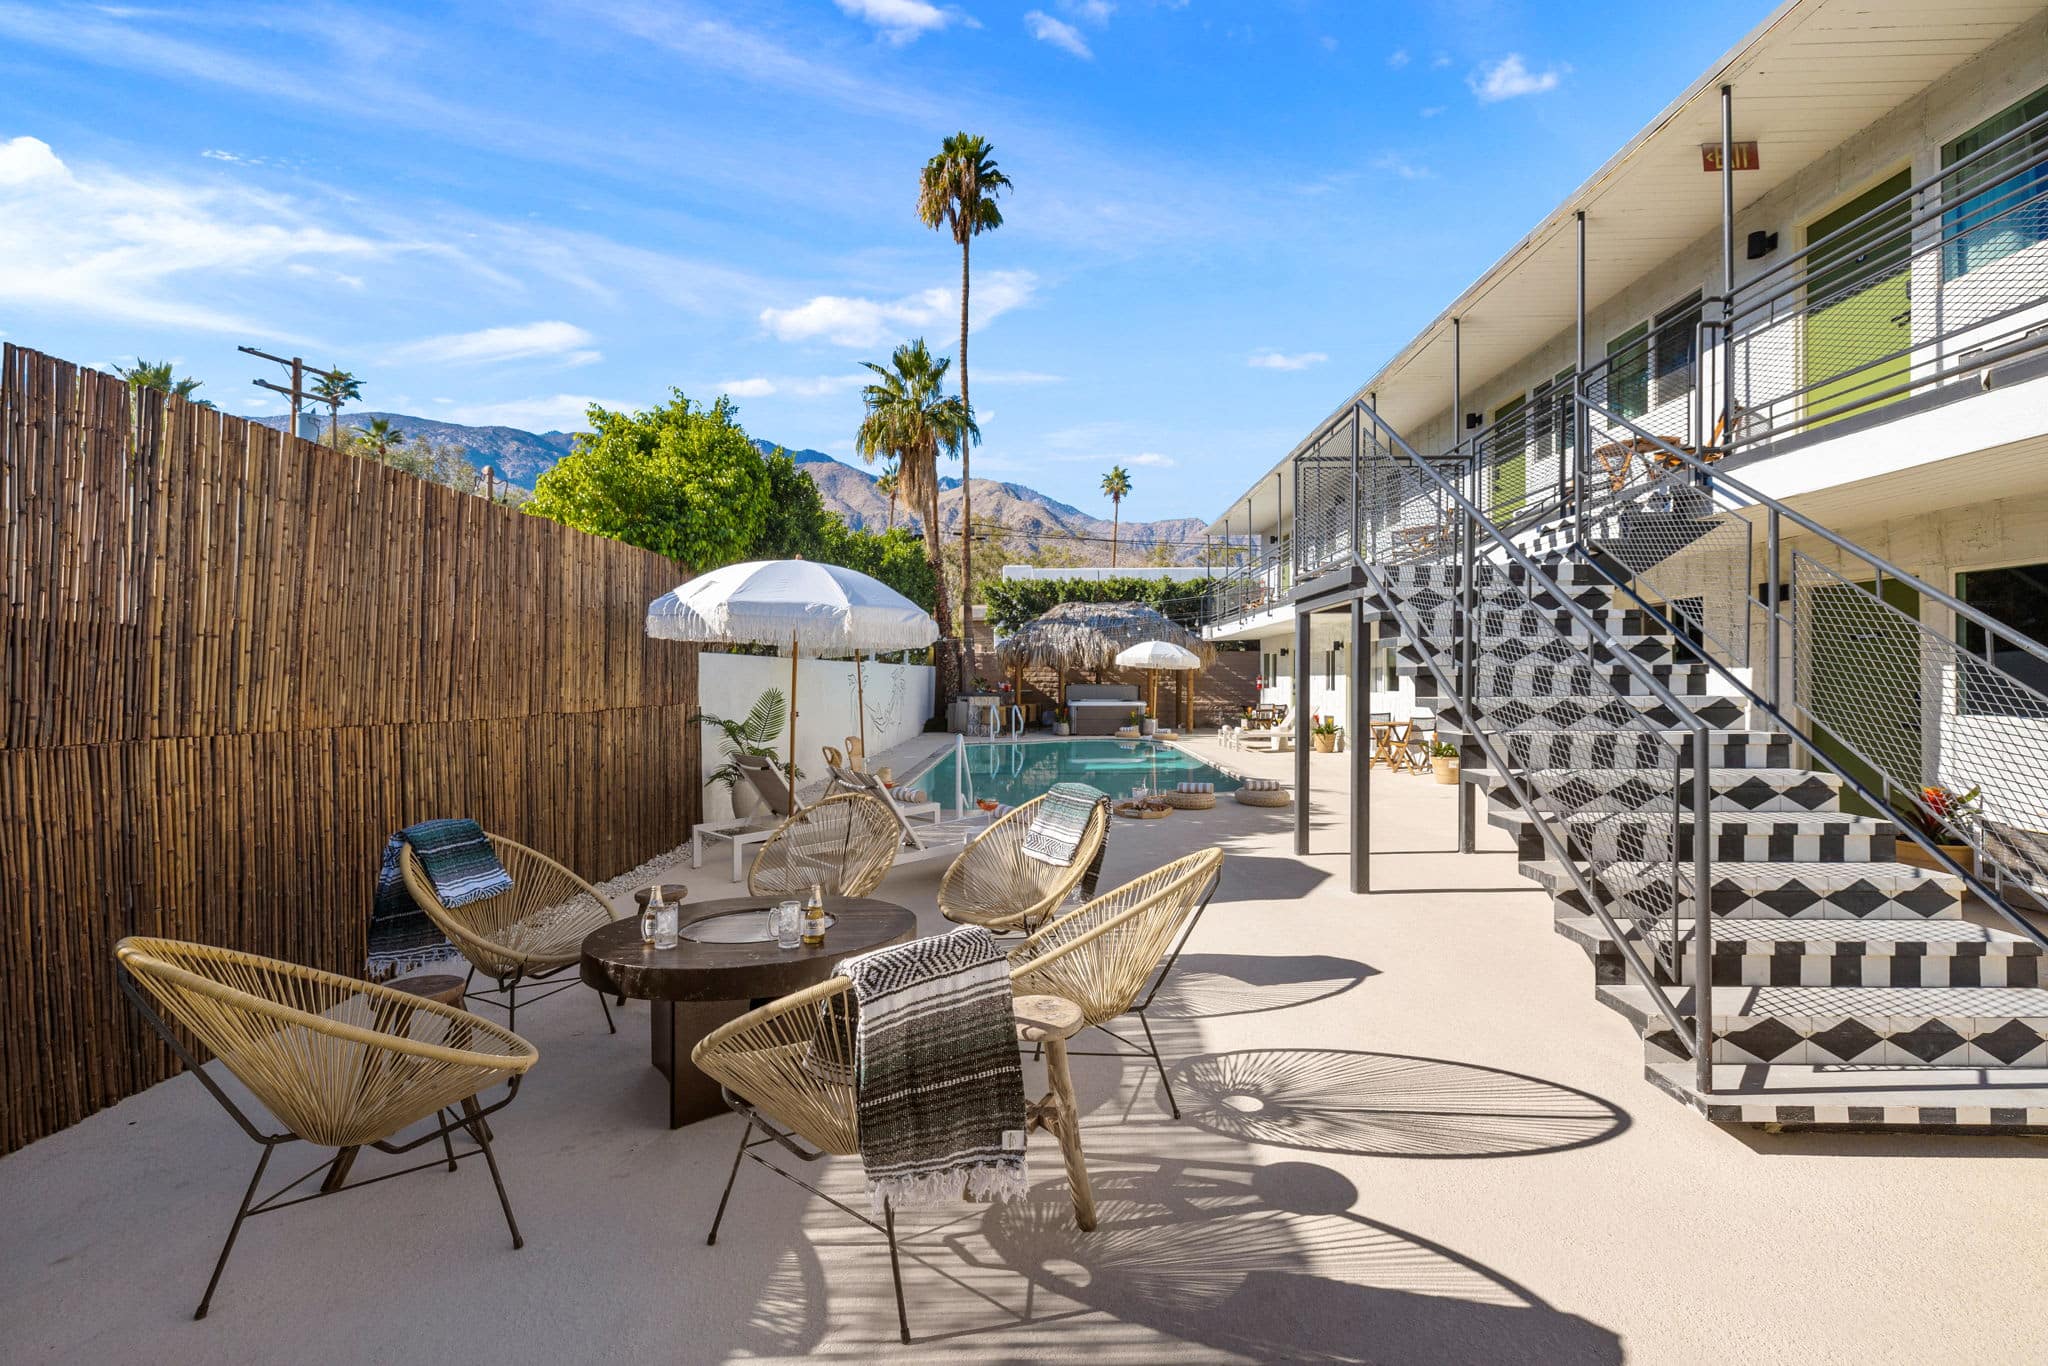 A sunny outdoor patio with wicker chairs and tables, a white privacy fence, and an adjacent two-story building with an exterior staircase. Behind the area is a pool with loungers and umbrellas, set against a backdrop of palm trees and mountains under a blue sky.